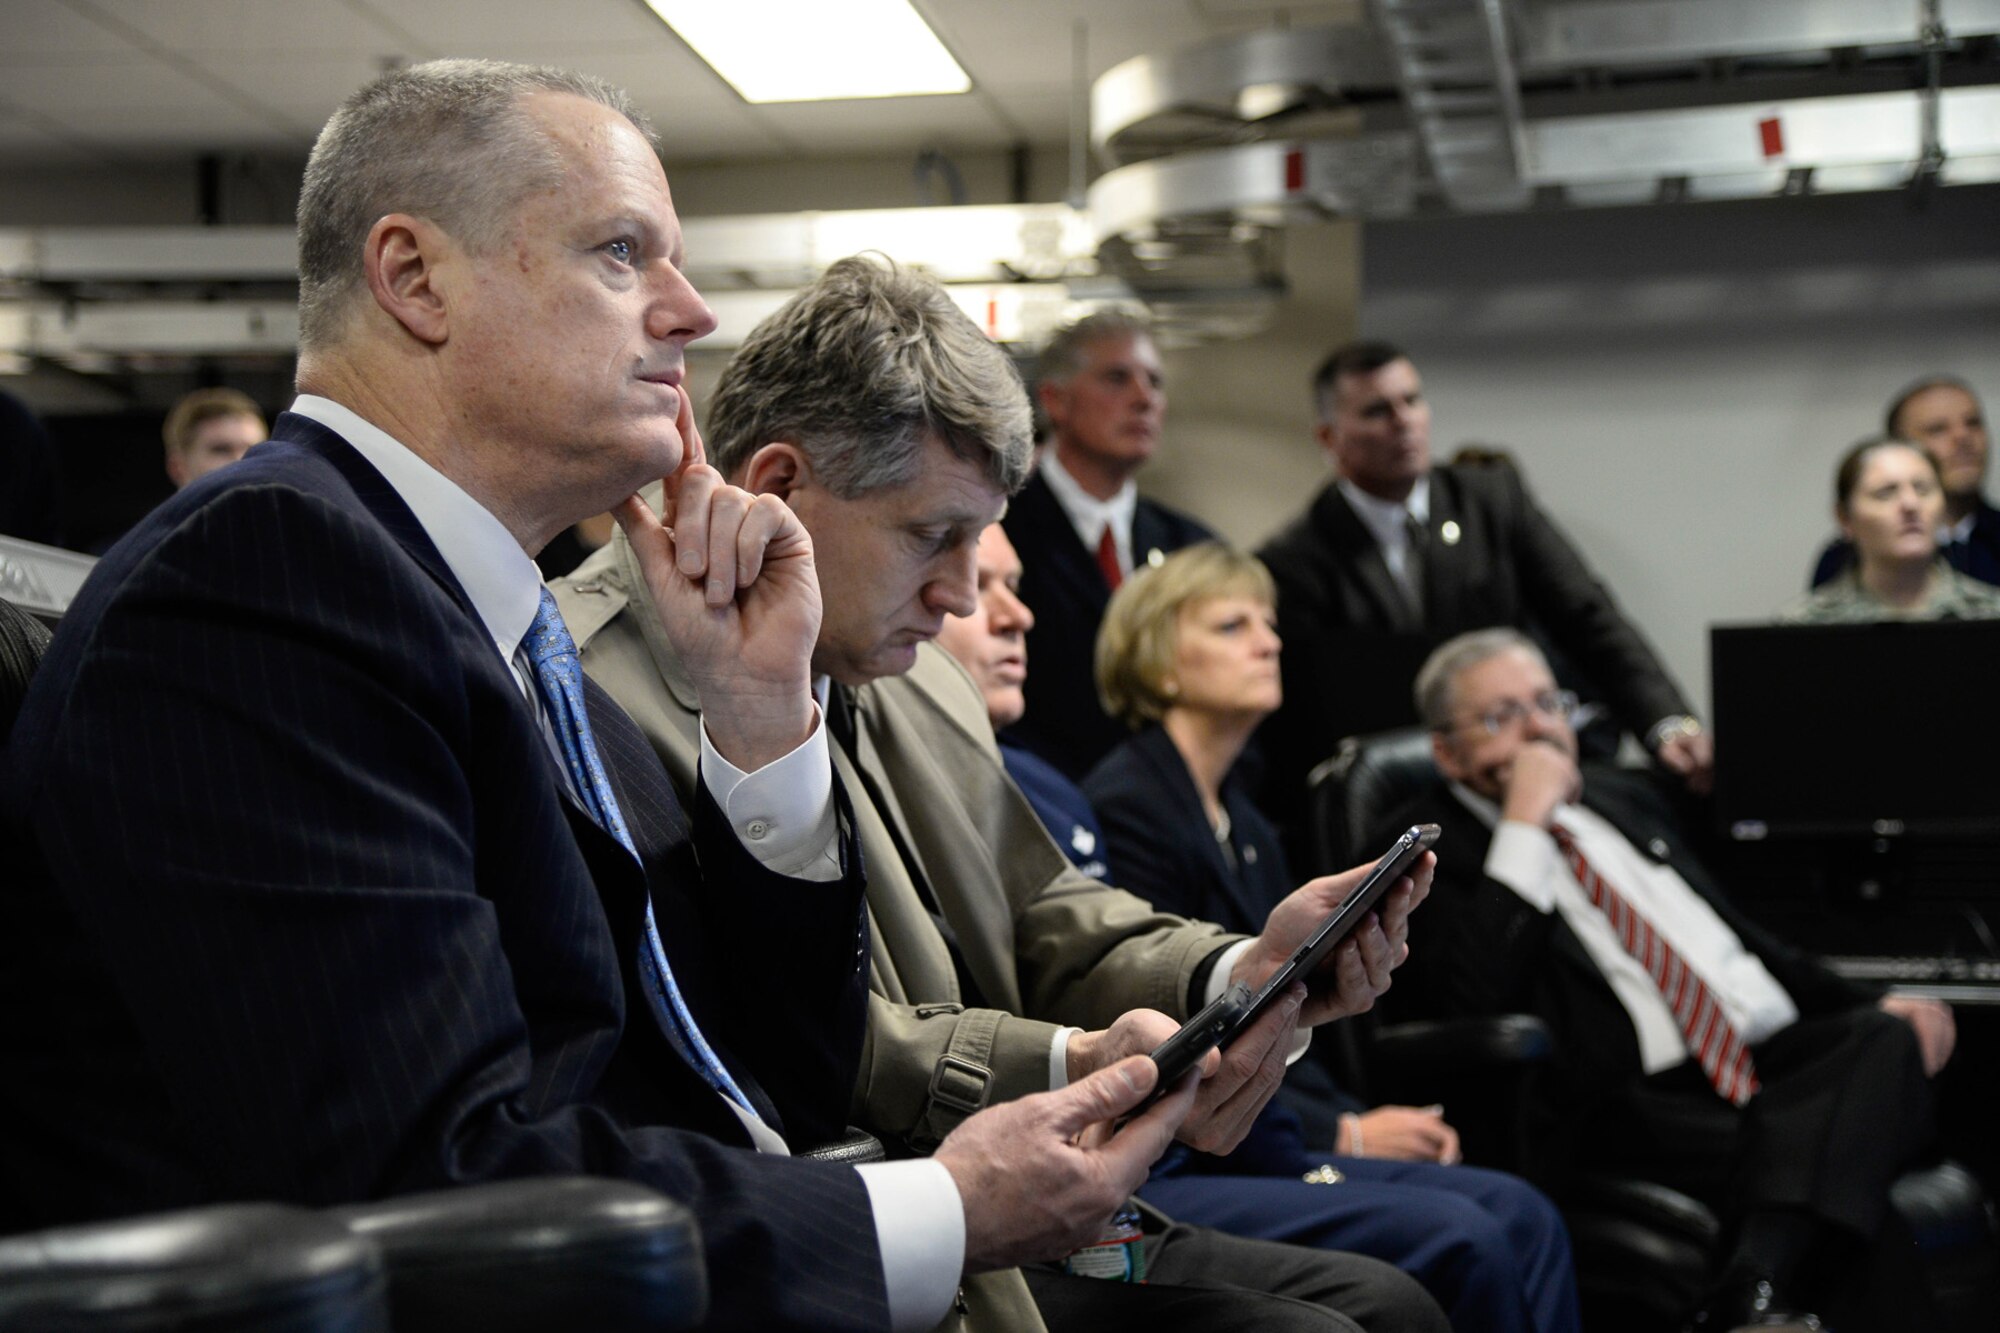 Mass. Governor Charlie Baker and Public Safety Secretary Daniel Bennett learn about how officials track real time emergencies through portable devices during a visit to the Hanscom Collaboration and Innovation Center April 10. The governor also saw program demonstrations and received briefings from each of the program executive officers and the base commander. (U.S. Air Force photo by Mark Herlihy)